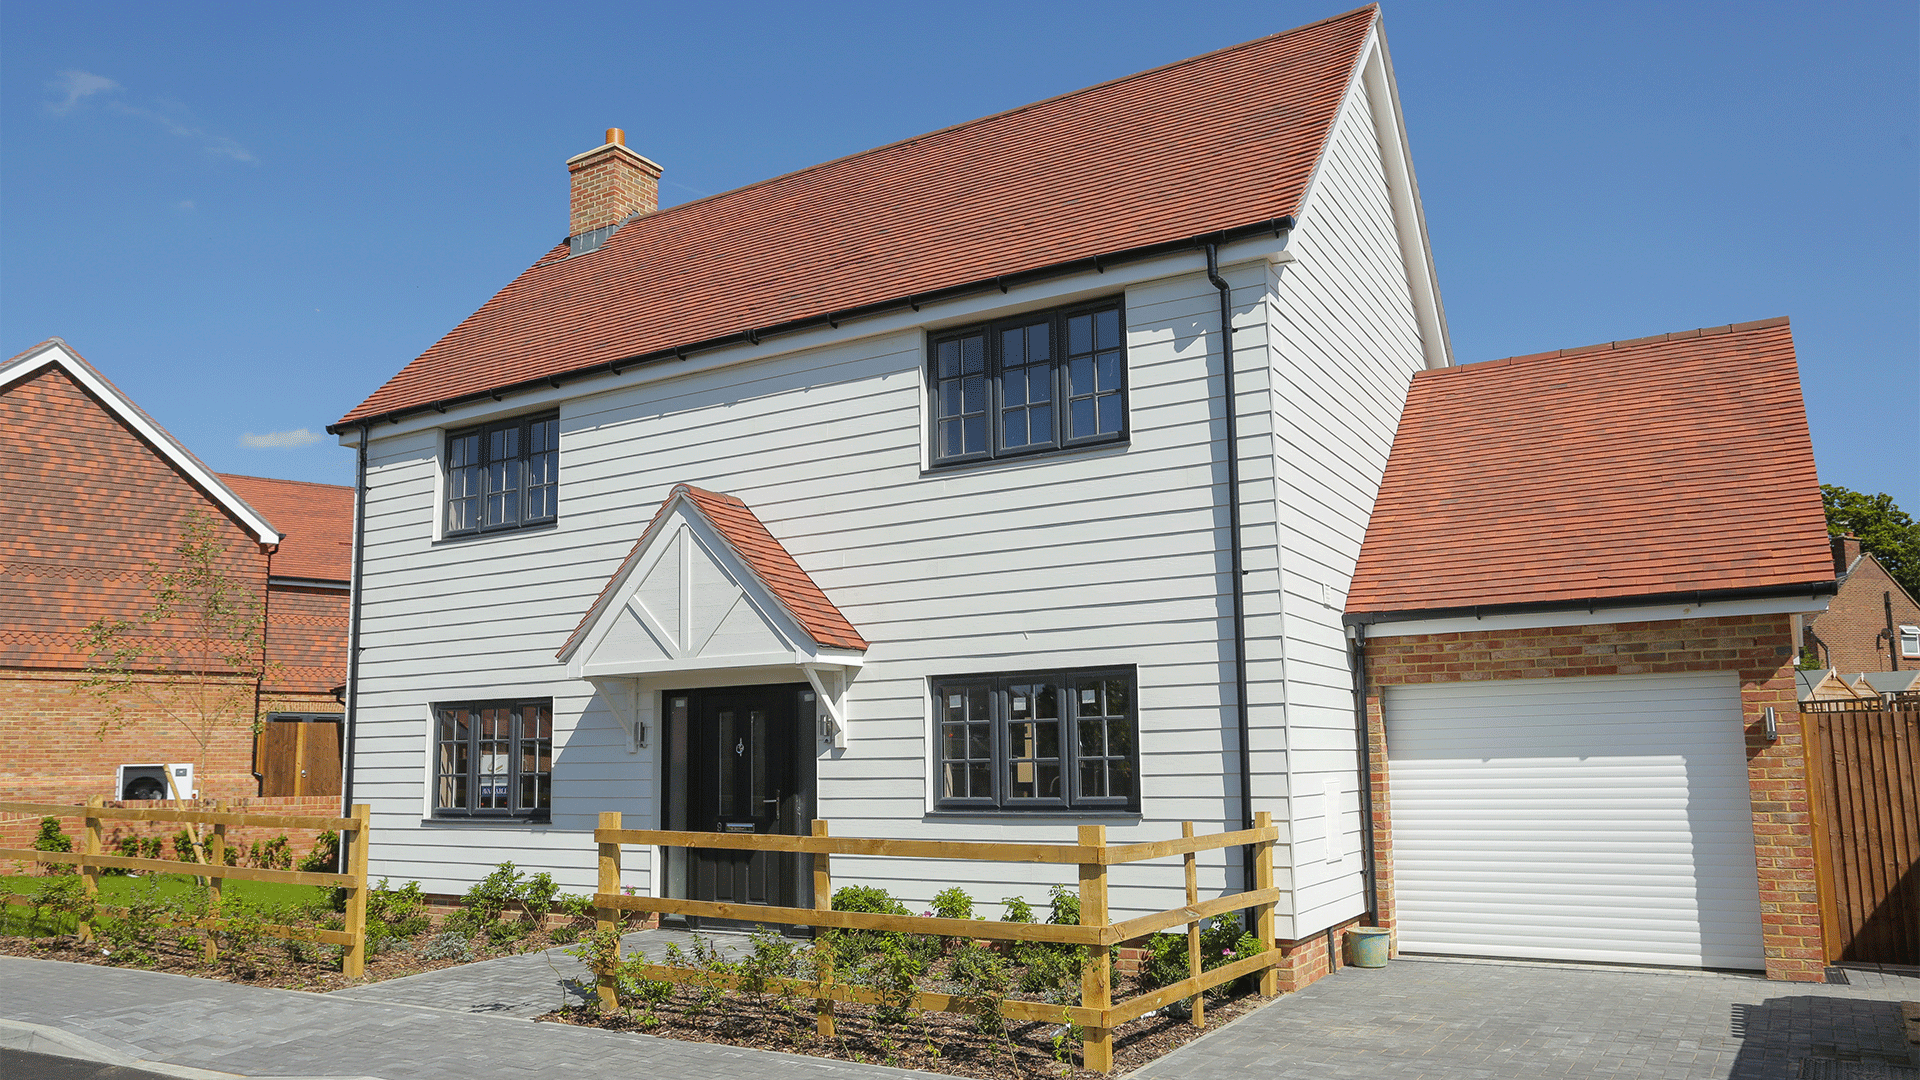 Miller's Meadow - Plot 7 featuring a large white detached house and garage on a sunny road